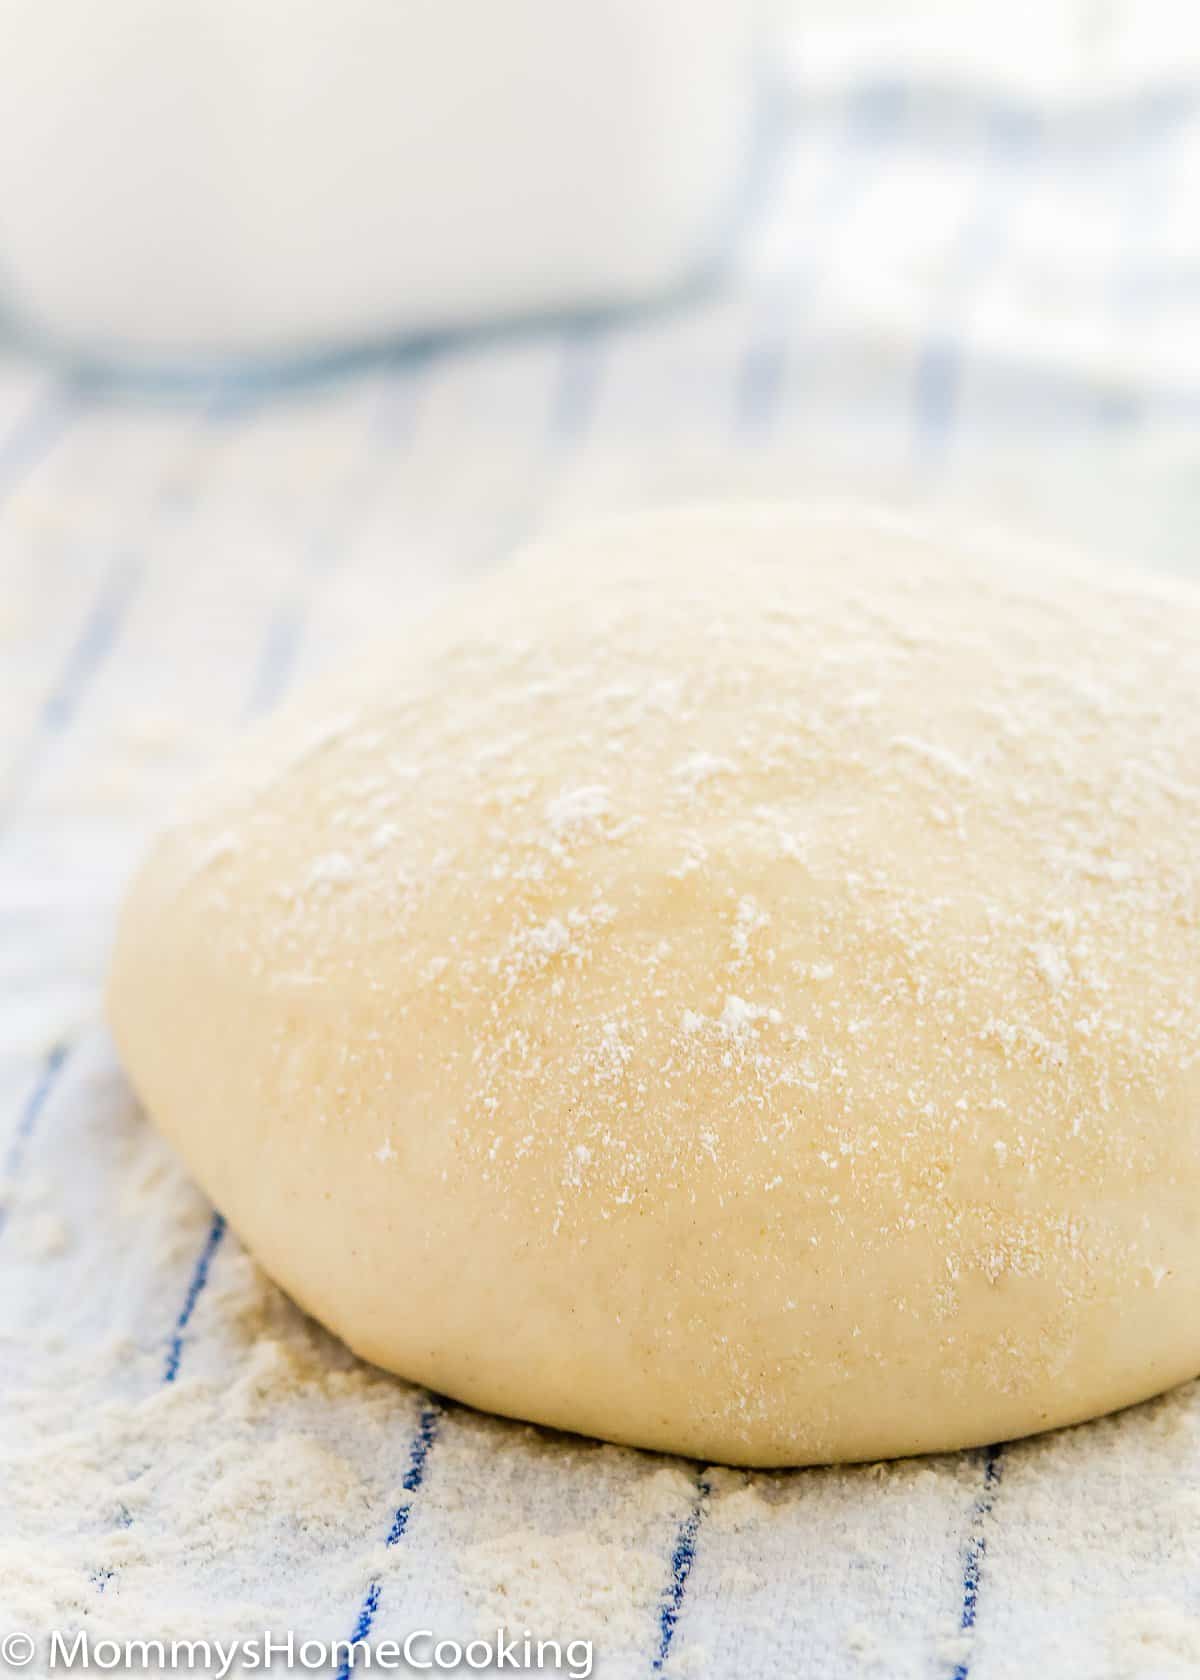 Homemade Pizza Dough Recipe - Mommy's Home Cooking